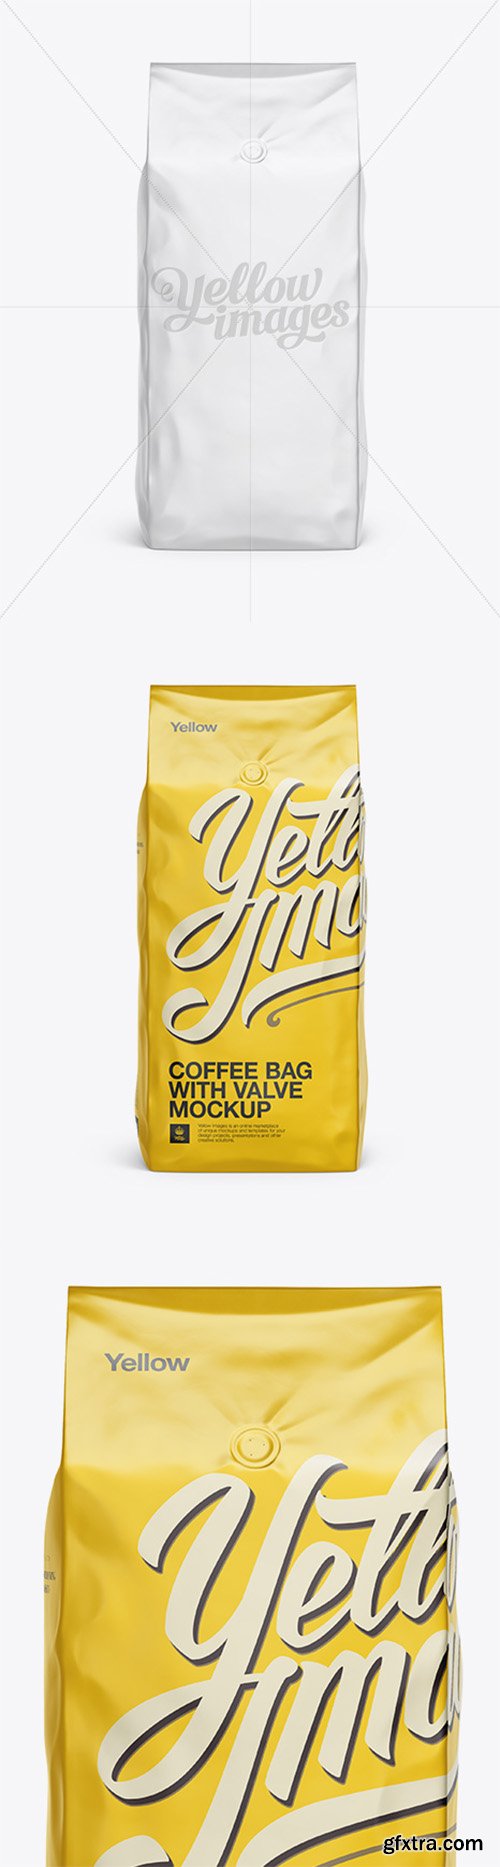 2,5 kg Matte Metallic Coffee Bag With Valve Mockup - Front View 12211